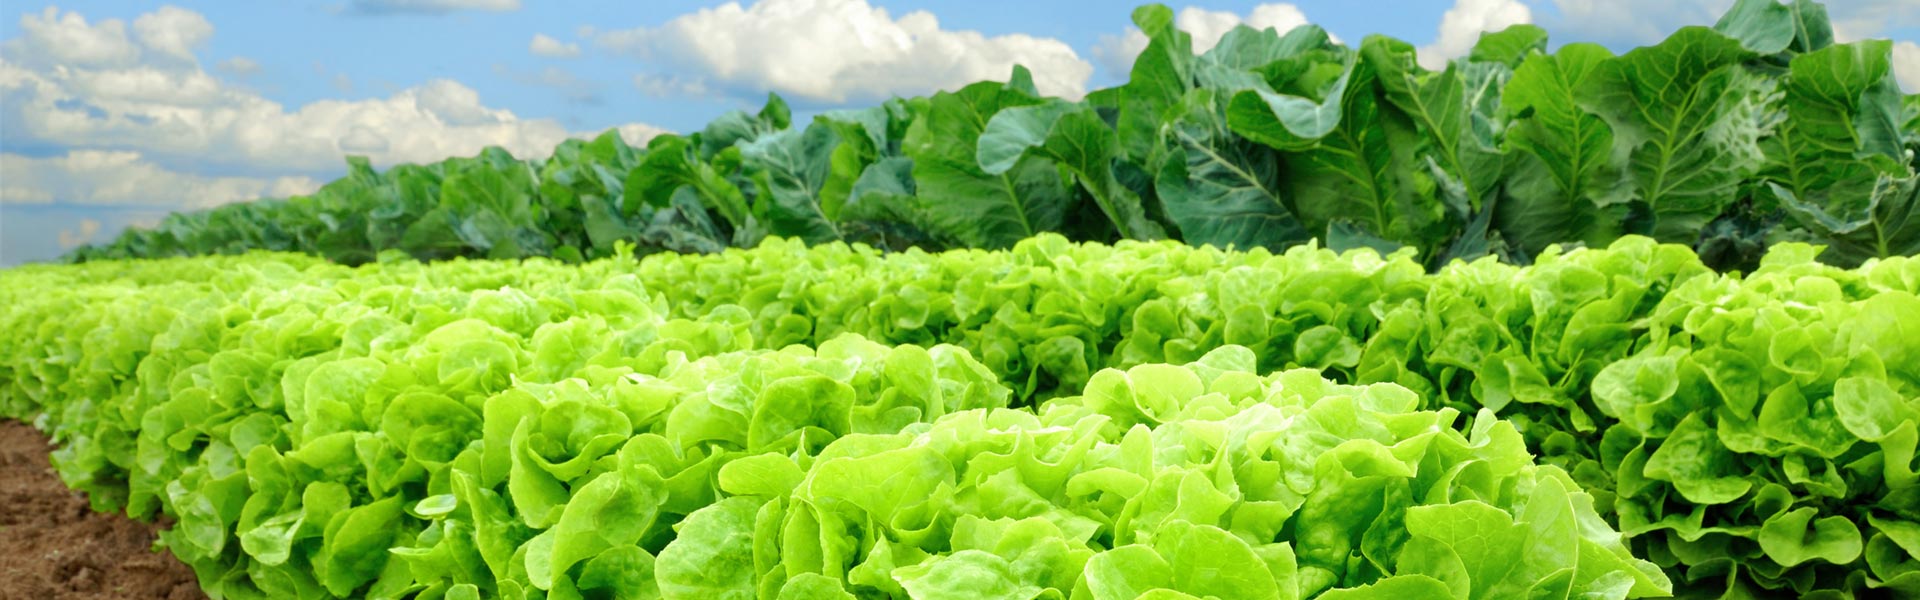 Building a Sustainable Global Food System with SAP S/4HANA Cloud